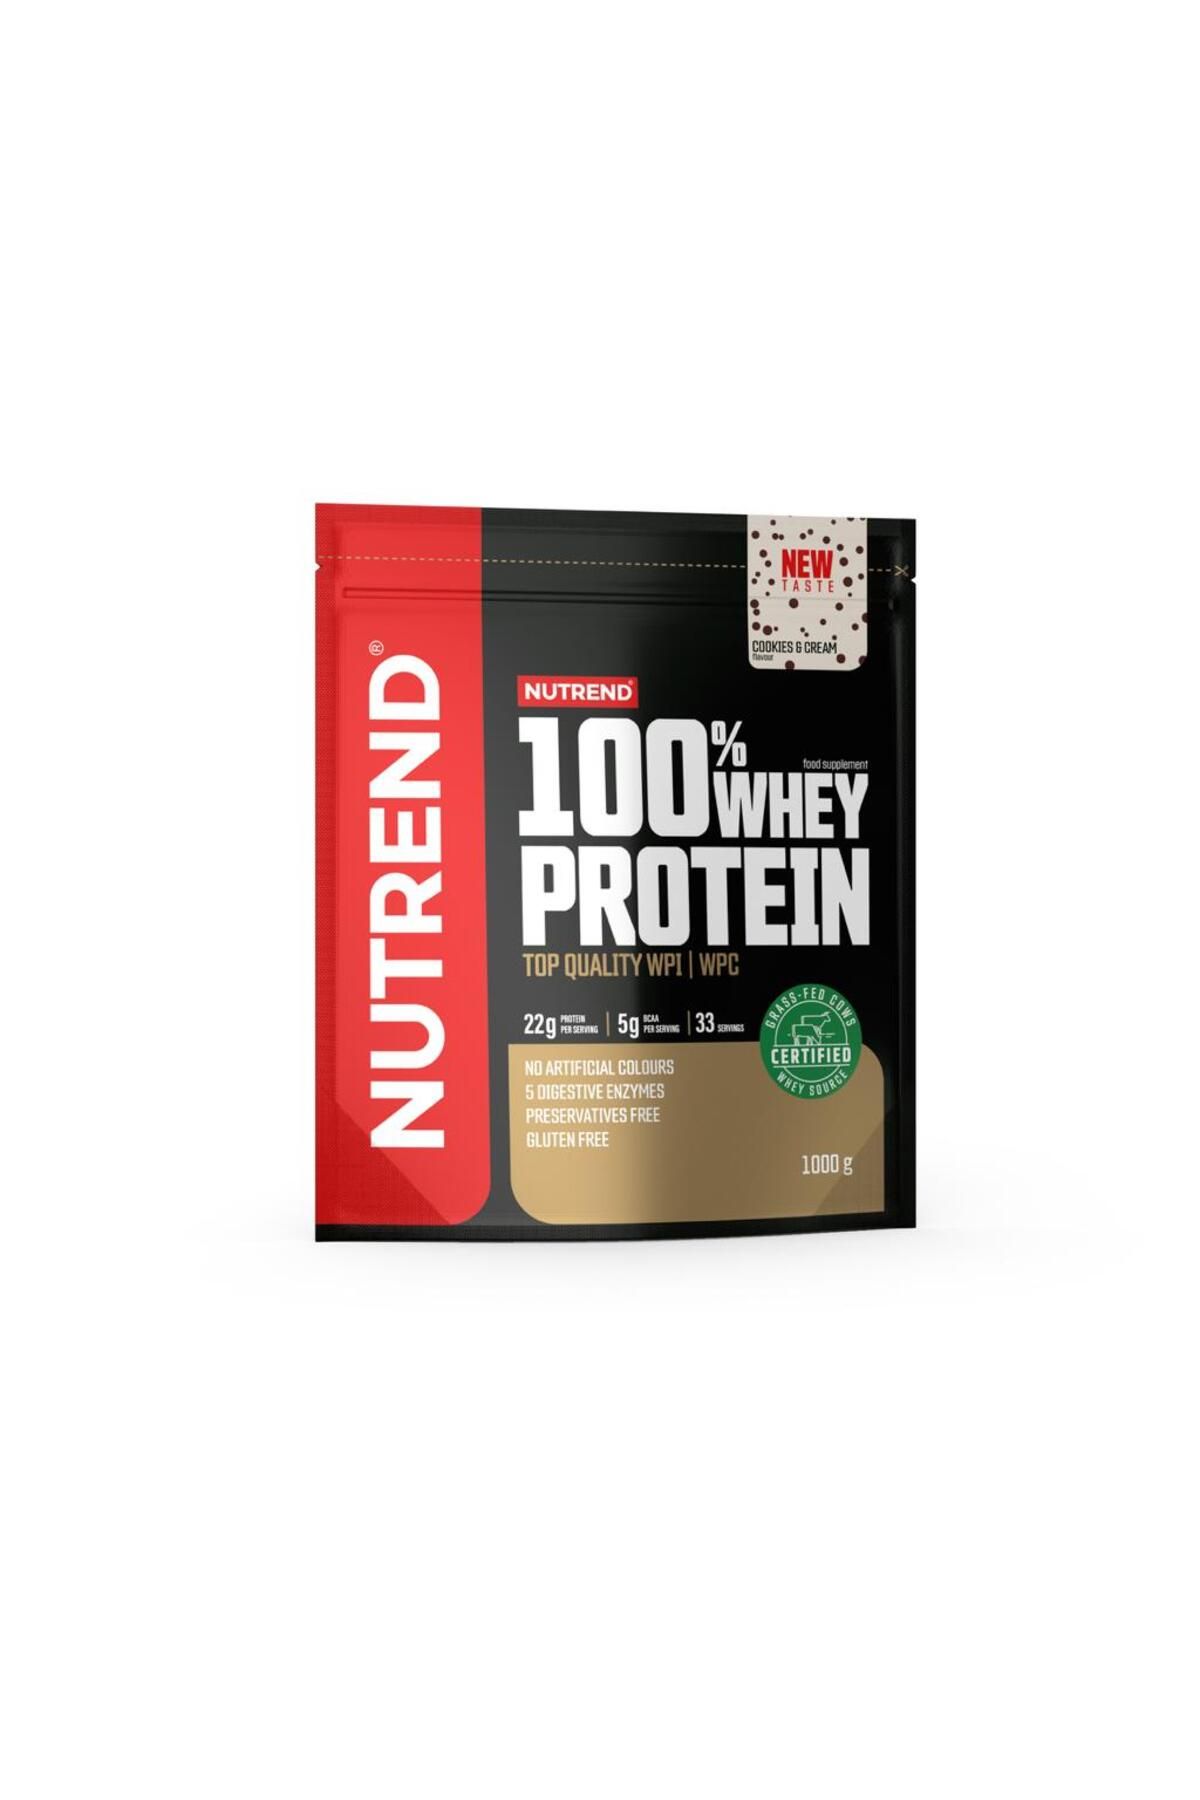 Nutrend Whey Protein - Cookies & Cream1000G